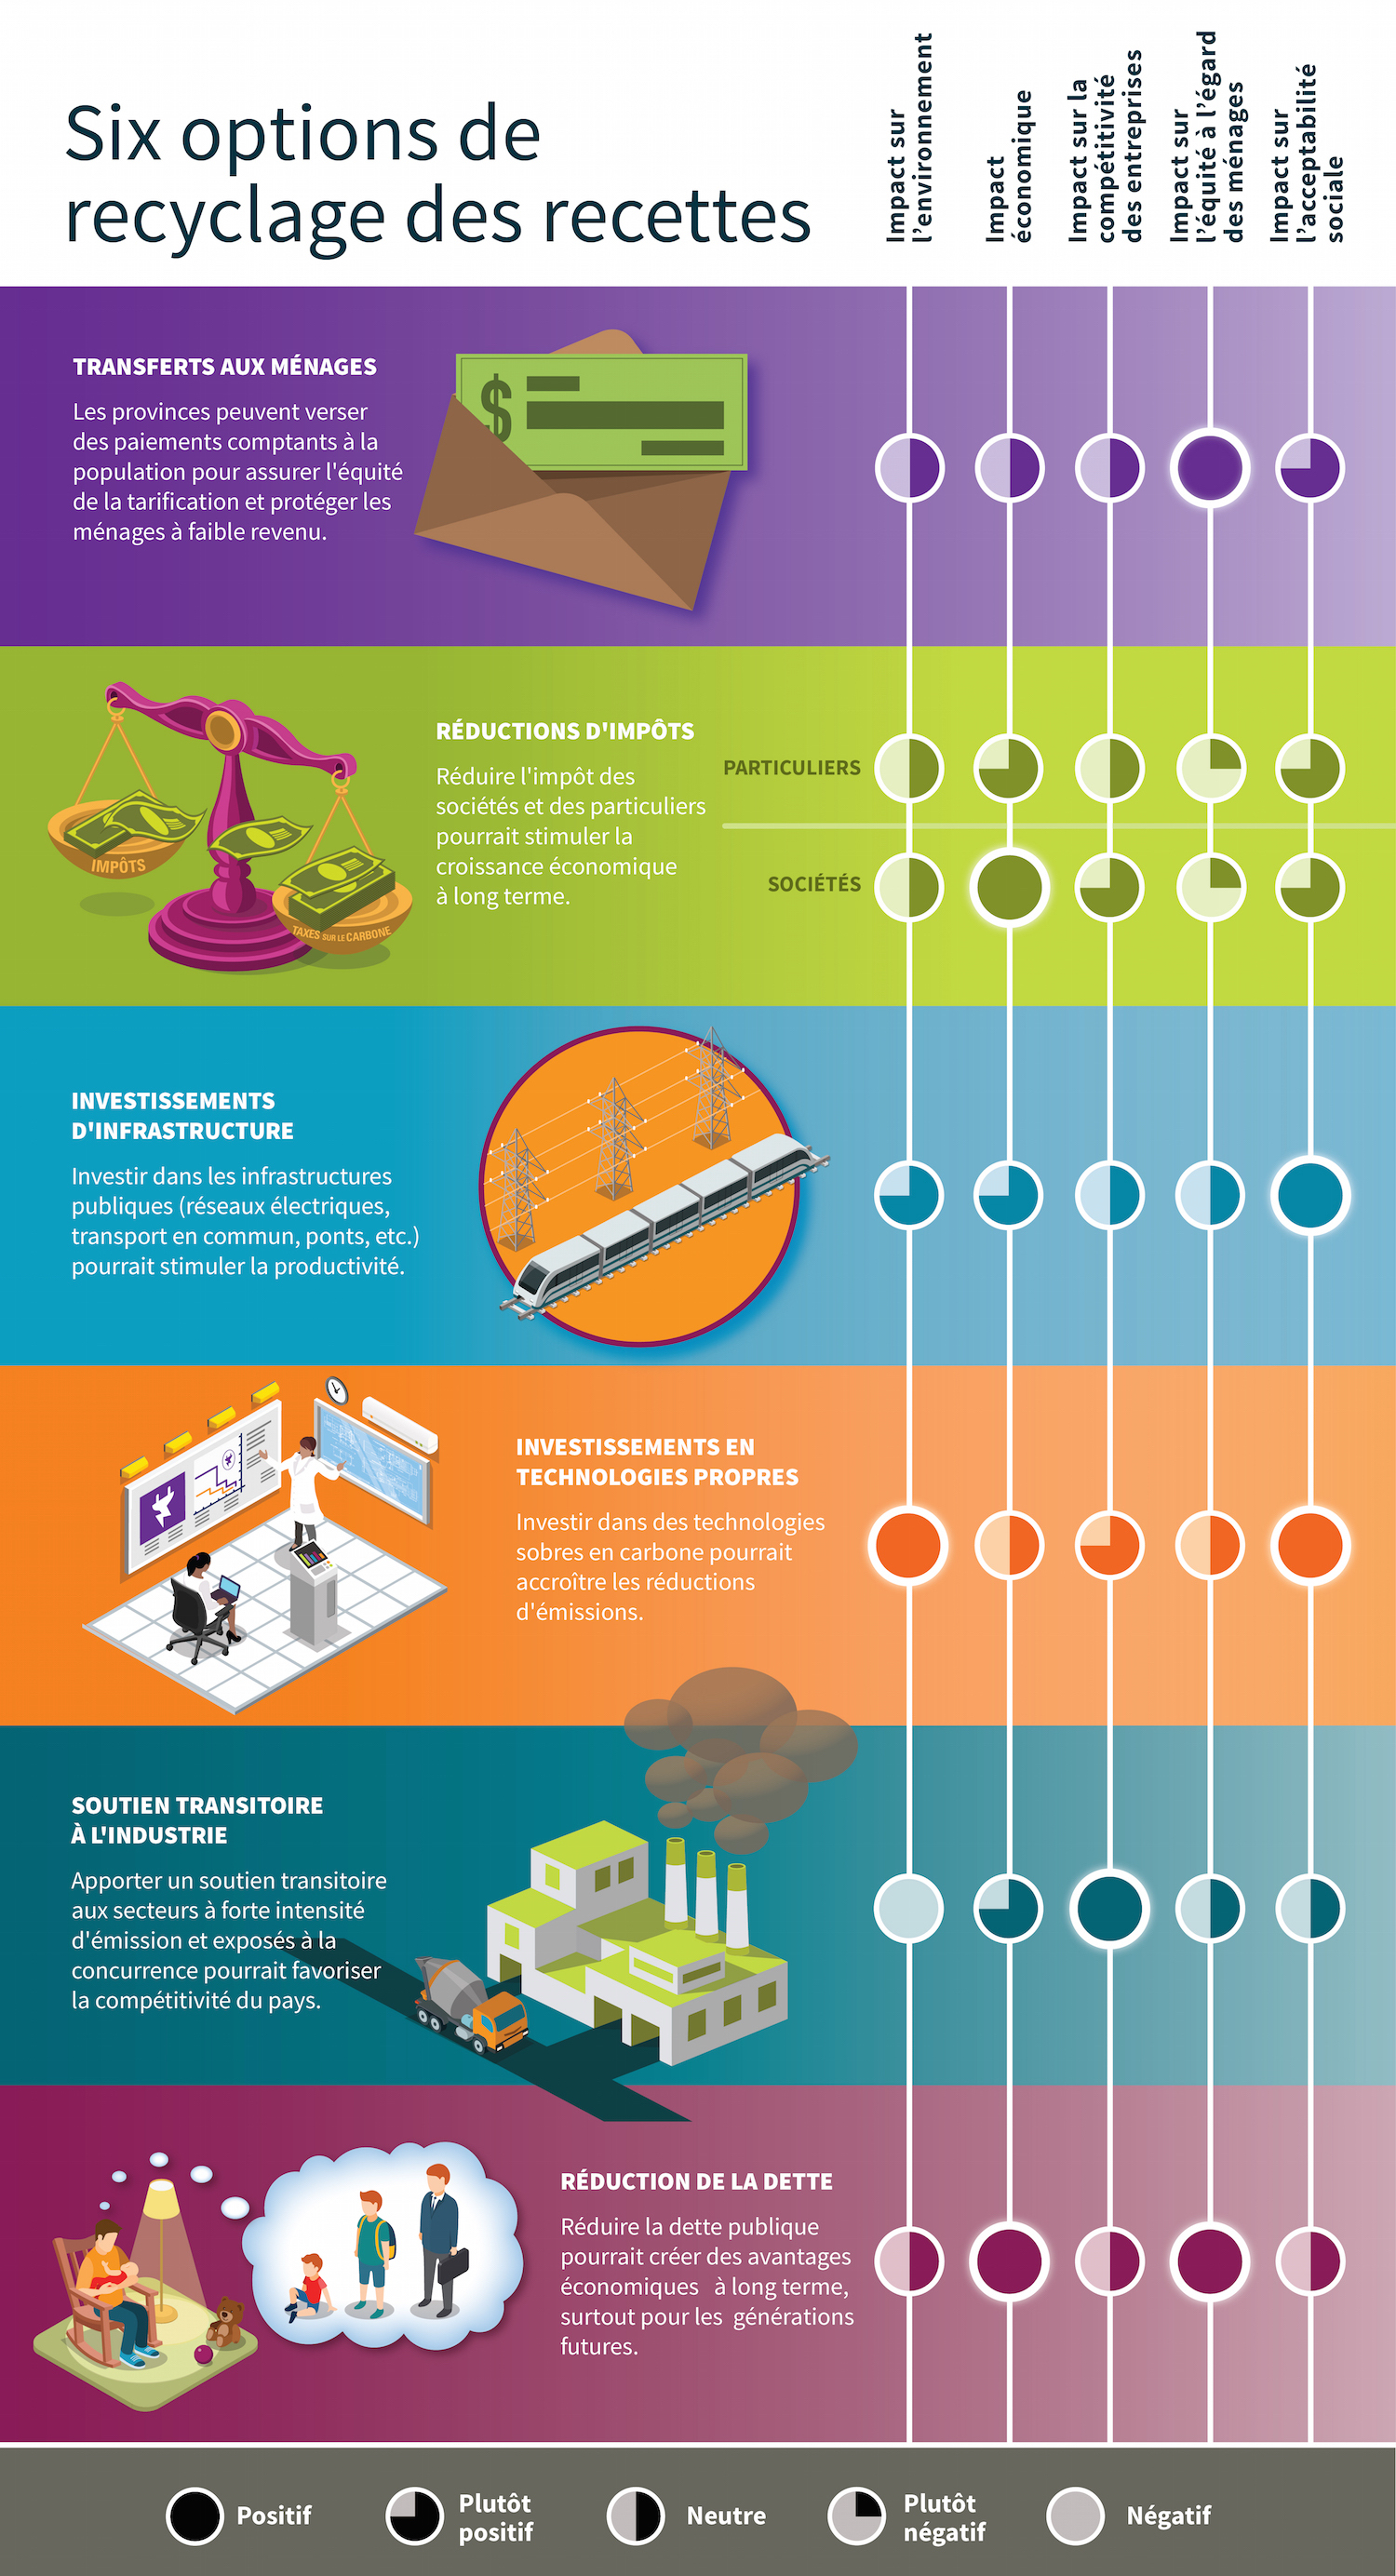 Ecofical_Choose Wisely_Infographic English_April 4